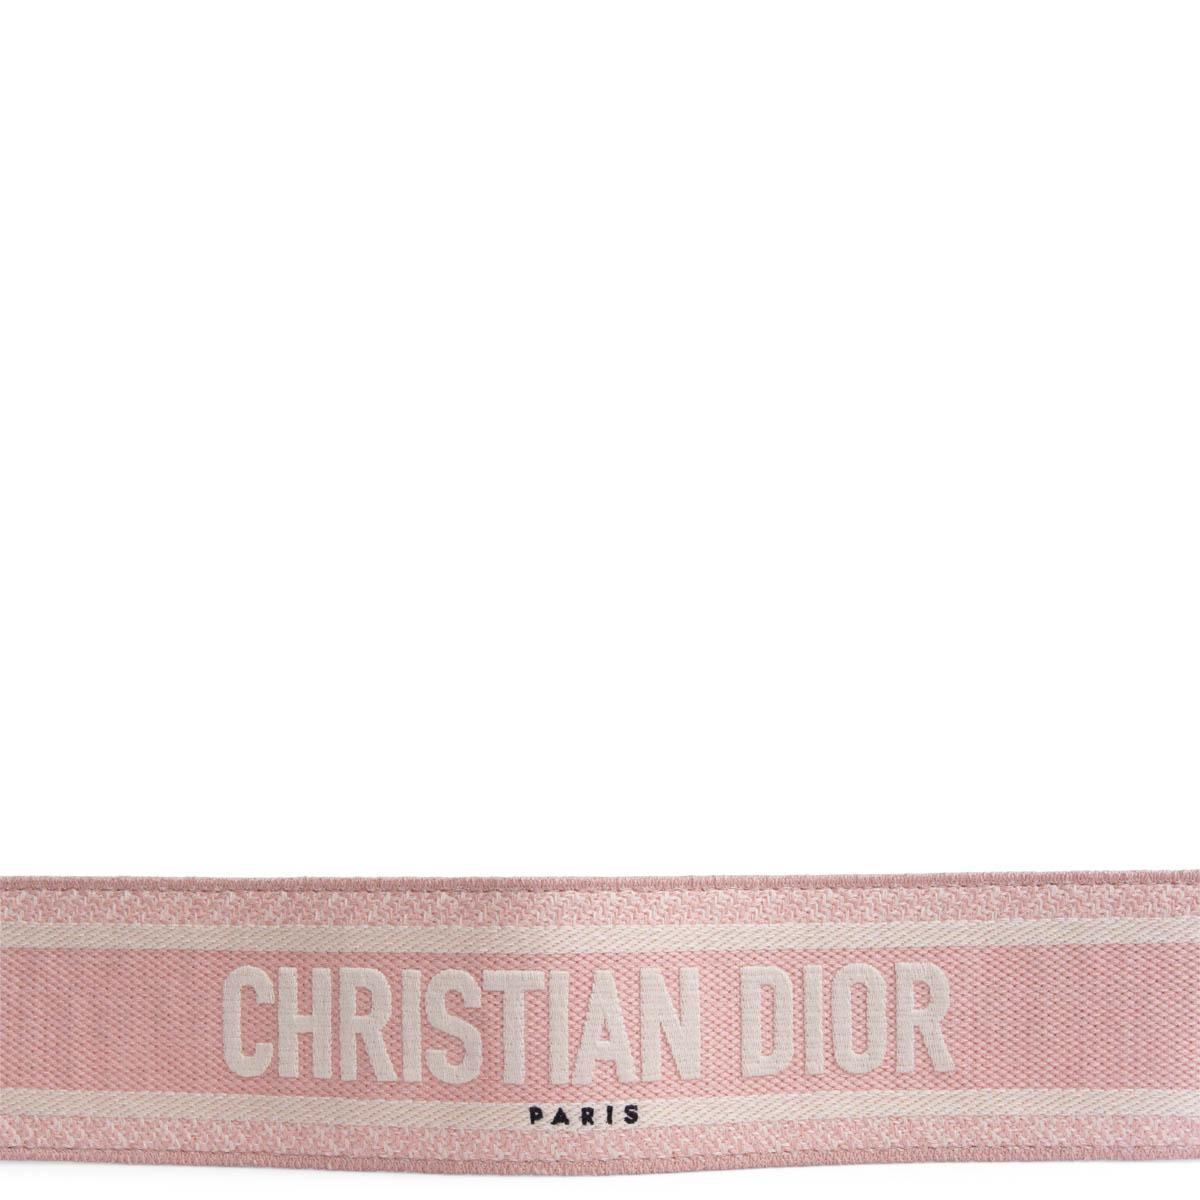 100% authentic Christian Dior bag strap in light pink and ecru canvas featuring gold-tone clasps with black leather trimming. Has been carried and shows a soft press marks on the inner leather parts. Overall in excellent condition.